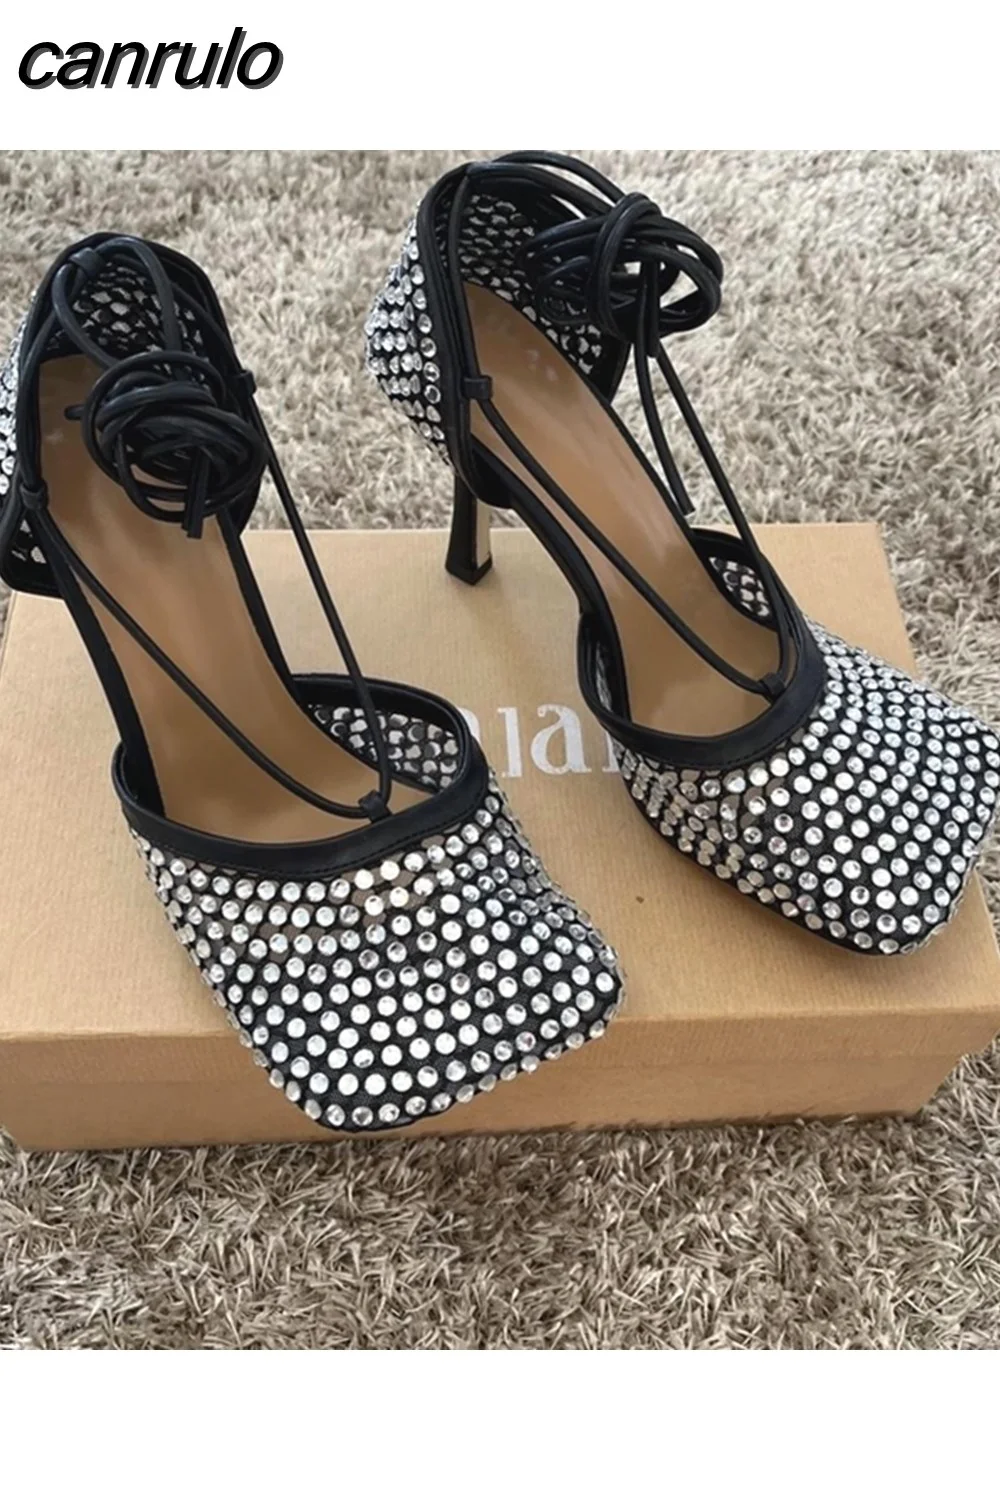 canrulo New Pumps Elegant Medium Heel Women's Shoes Bling Rhinestone Lace-Up Sexy Fashion High Heels Shoes Office Party Ladies